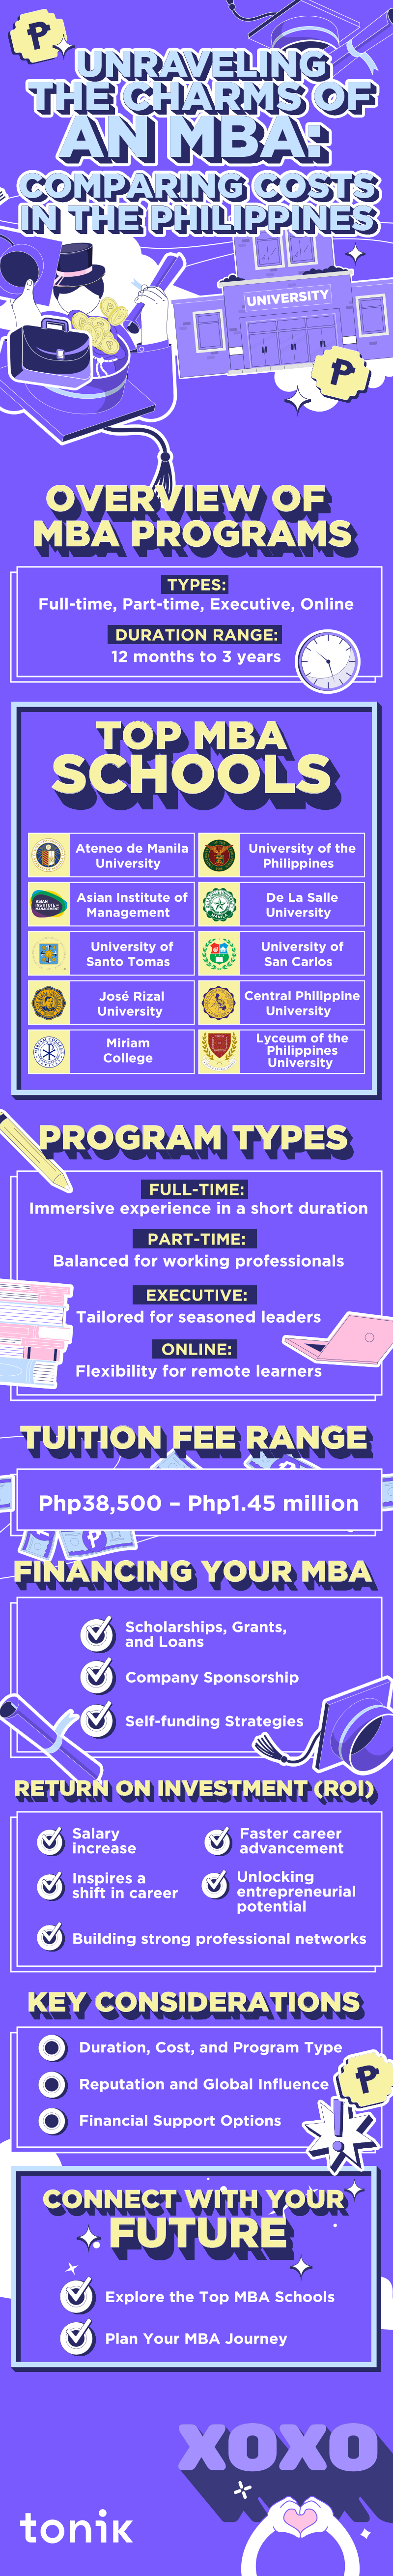 infographic that compares the costs of MBA programs in the philippines